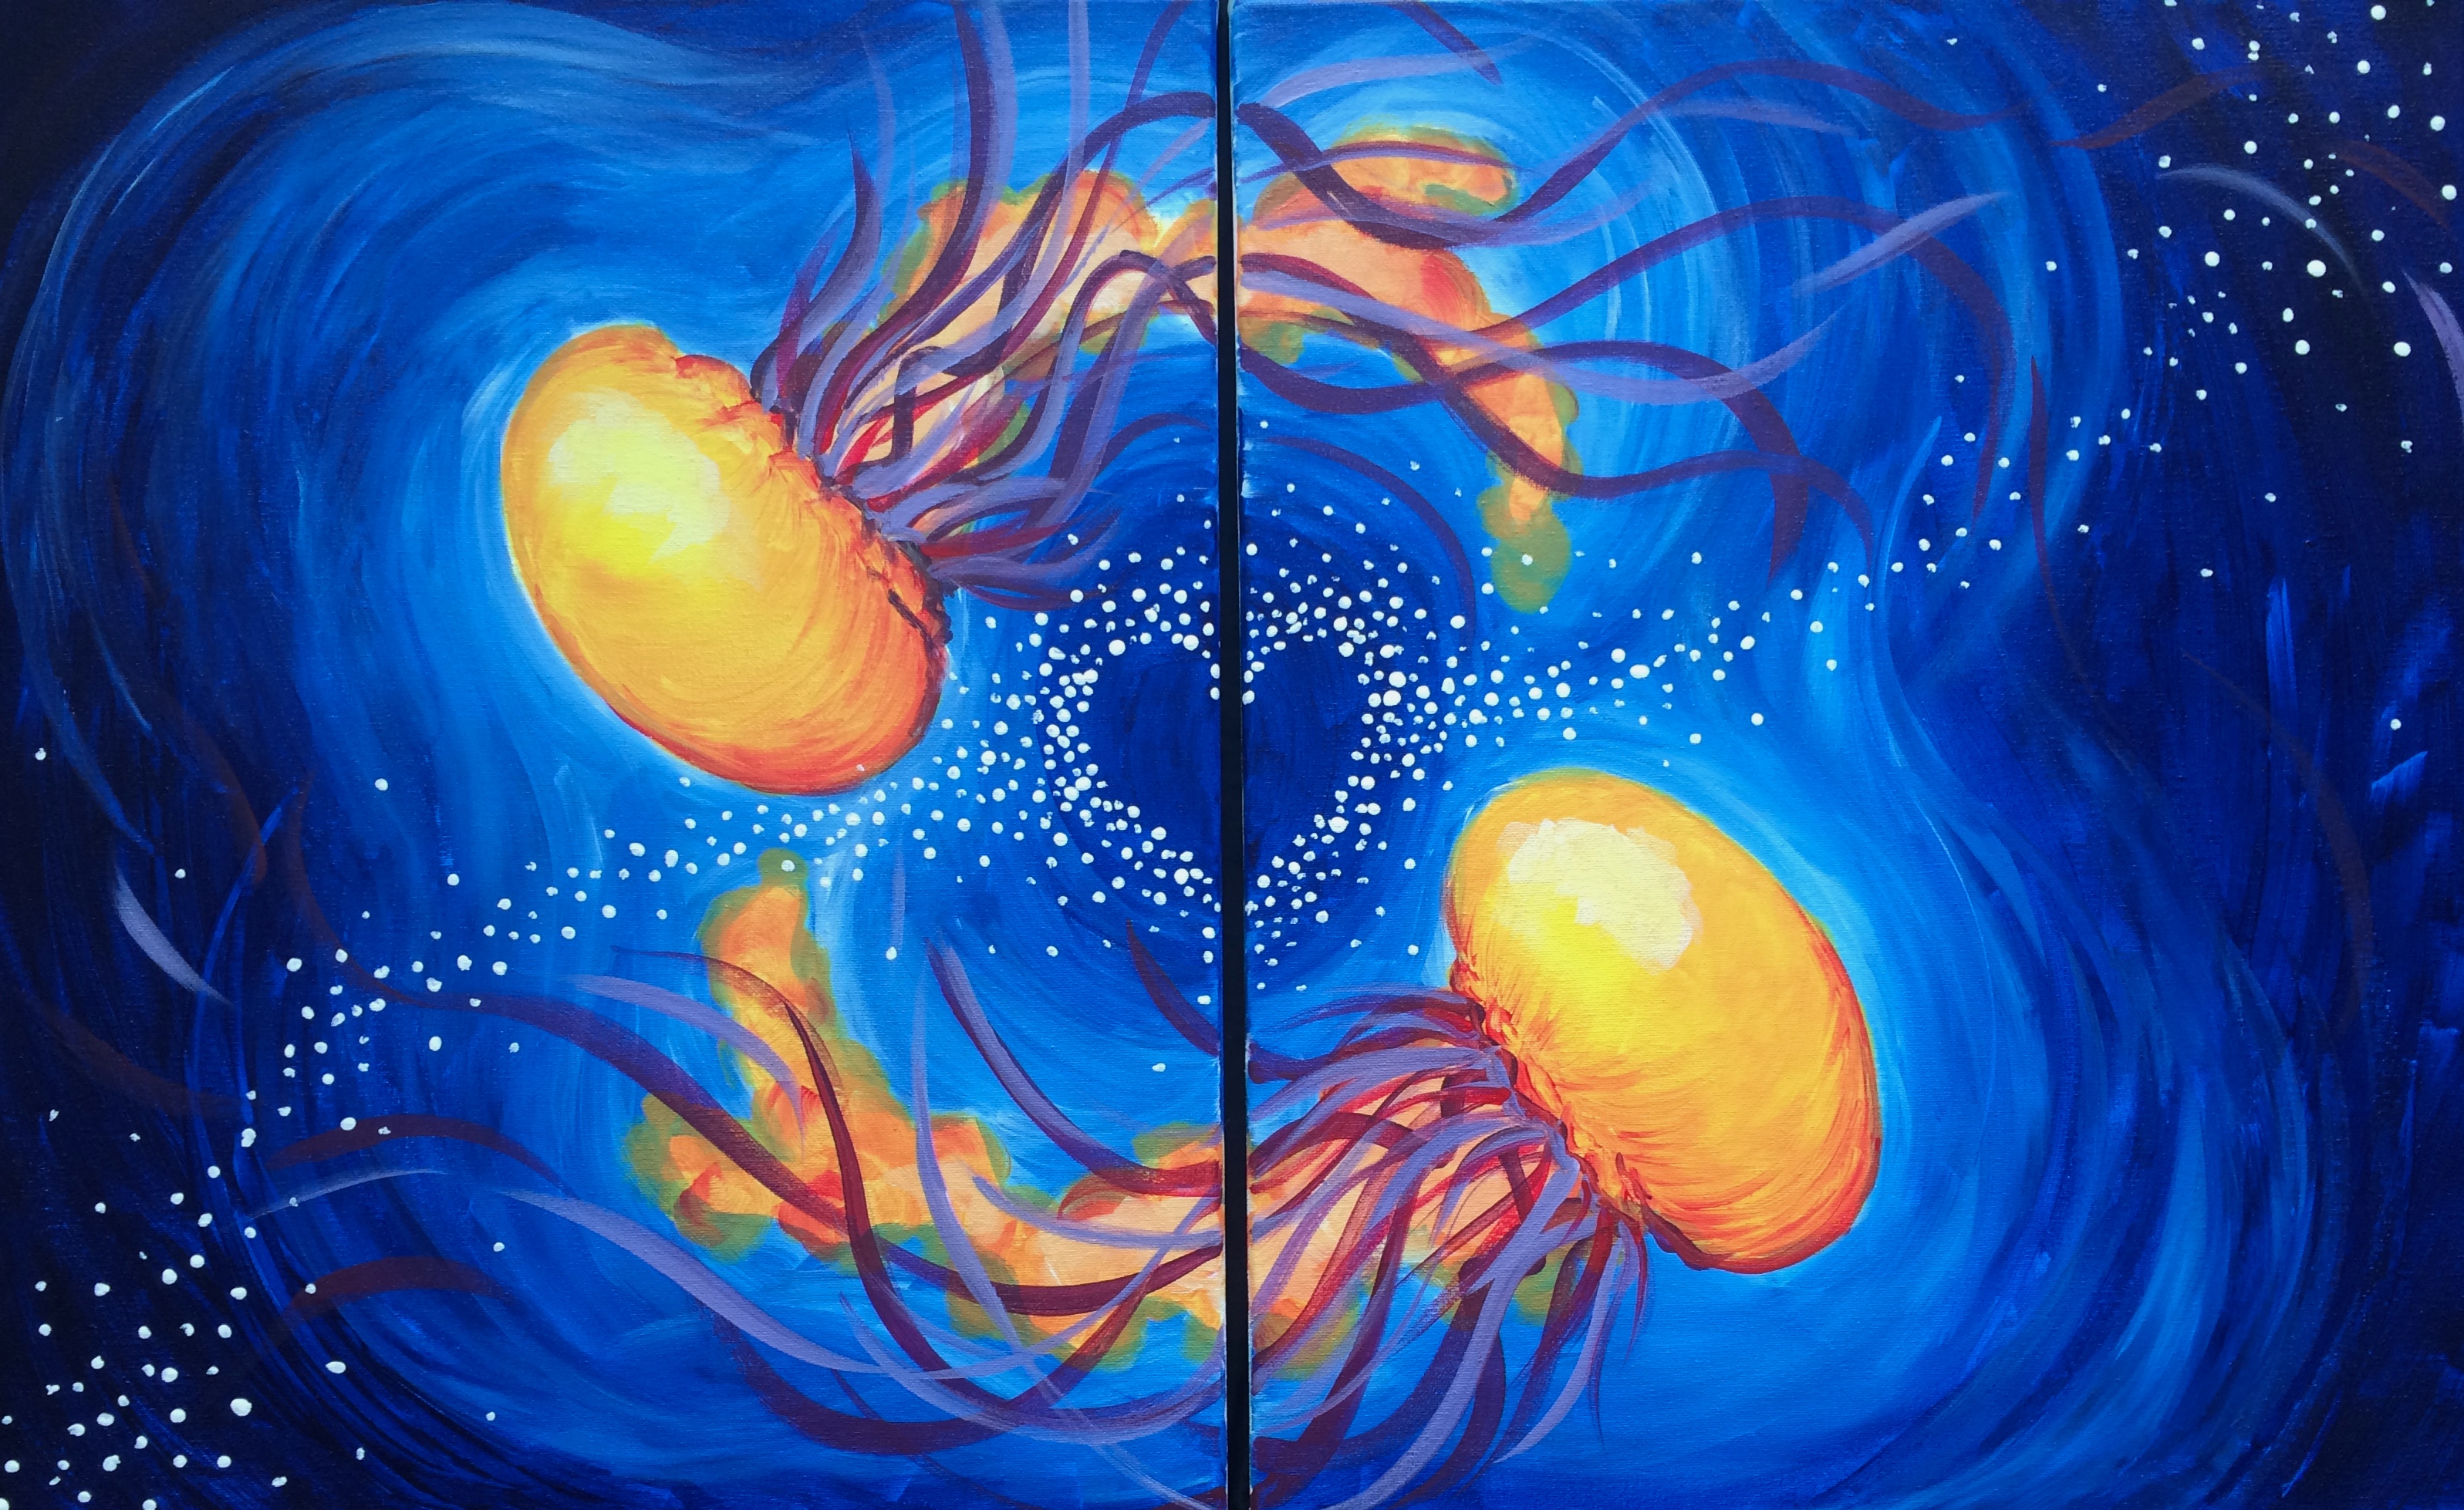 A Jellyfish Love Partner Painting paint nite project by Yaymaker